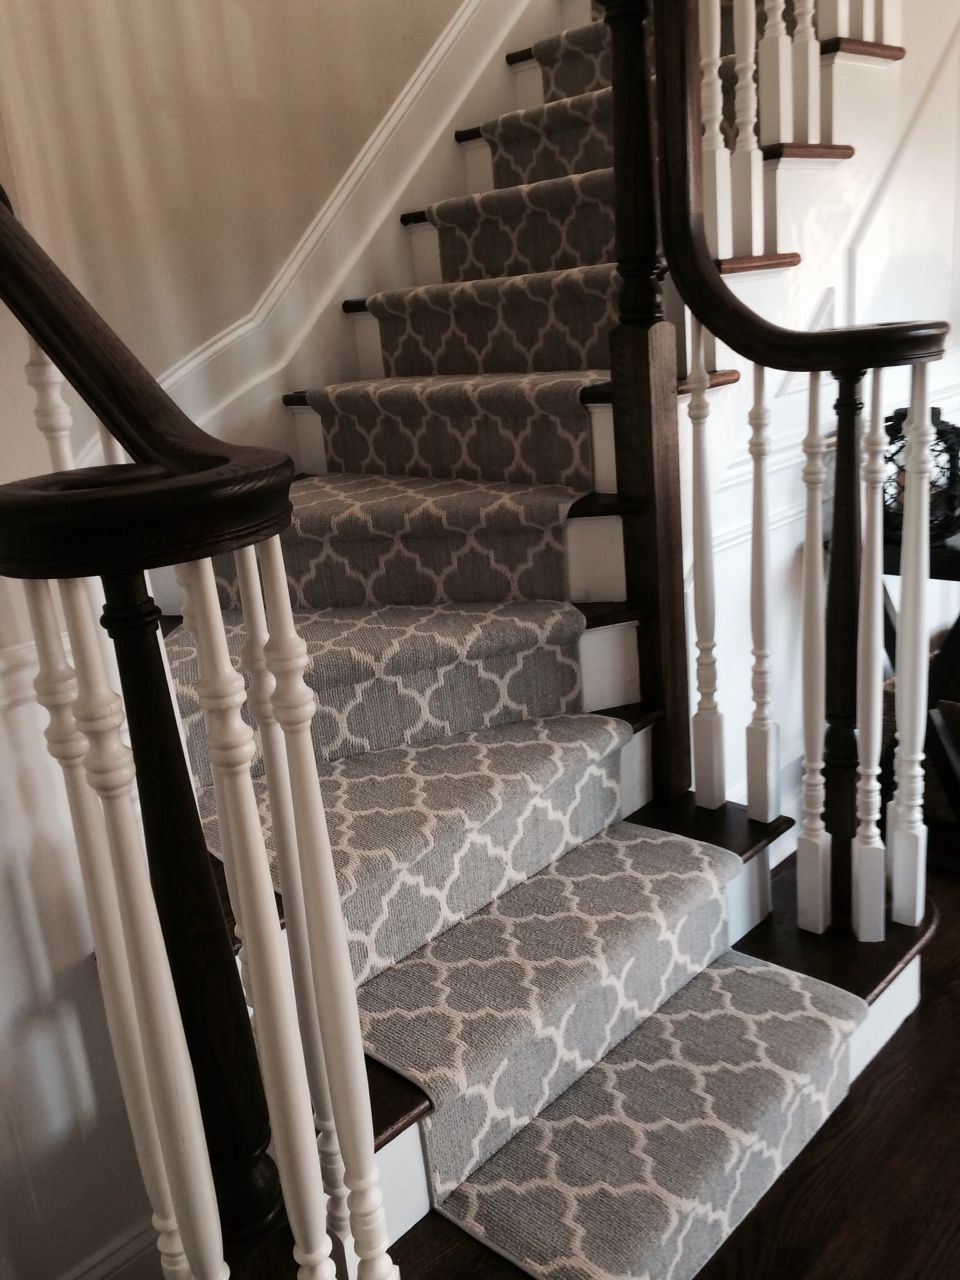 rugs on stairs make a statement on your stairs...with taza from tuftex - important to line CHTLHNR